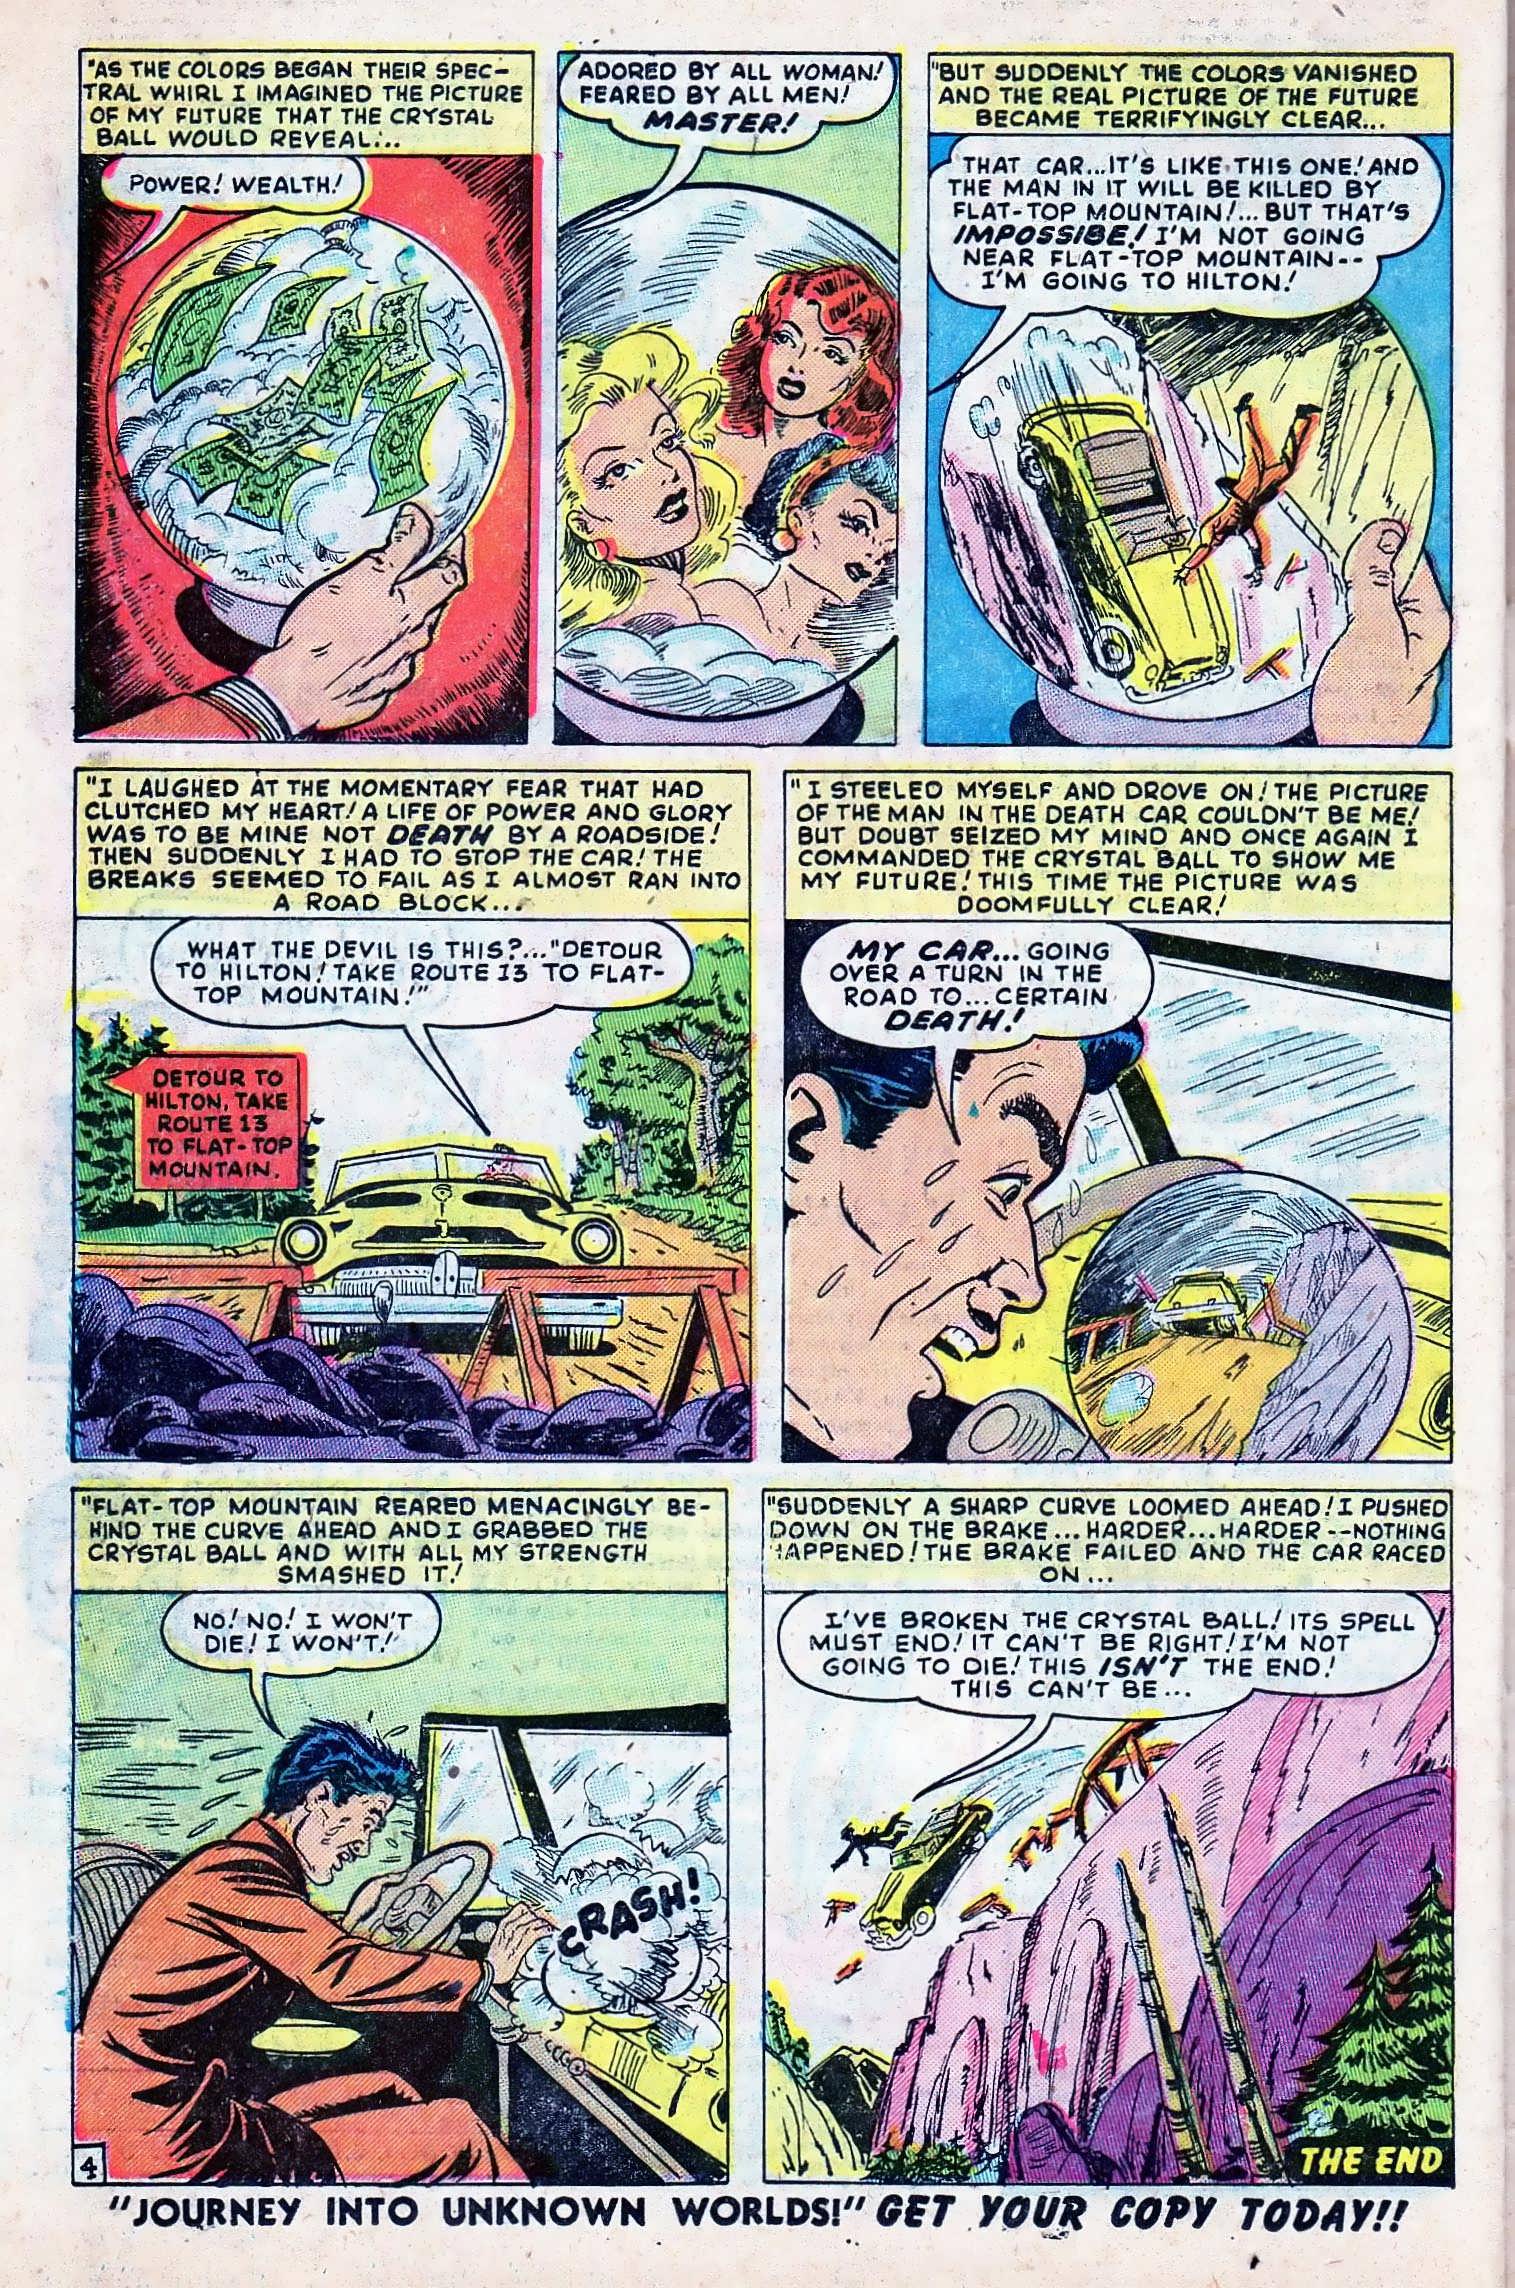 Marvel Tales (1949) 98 Page 25